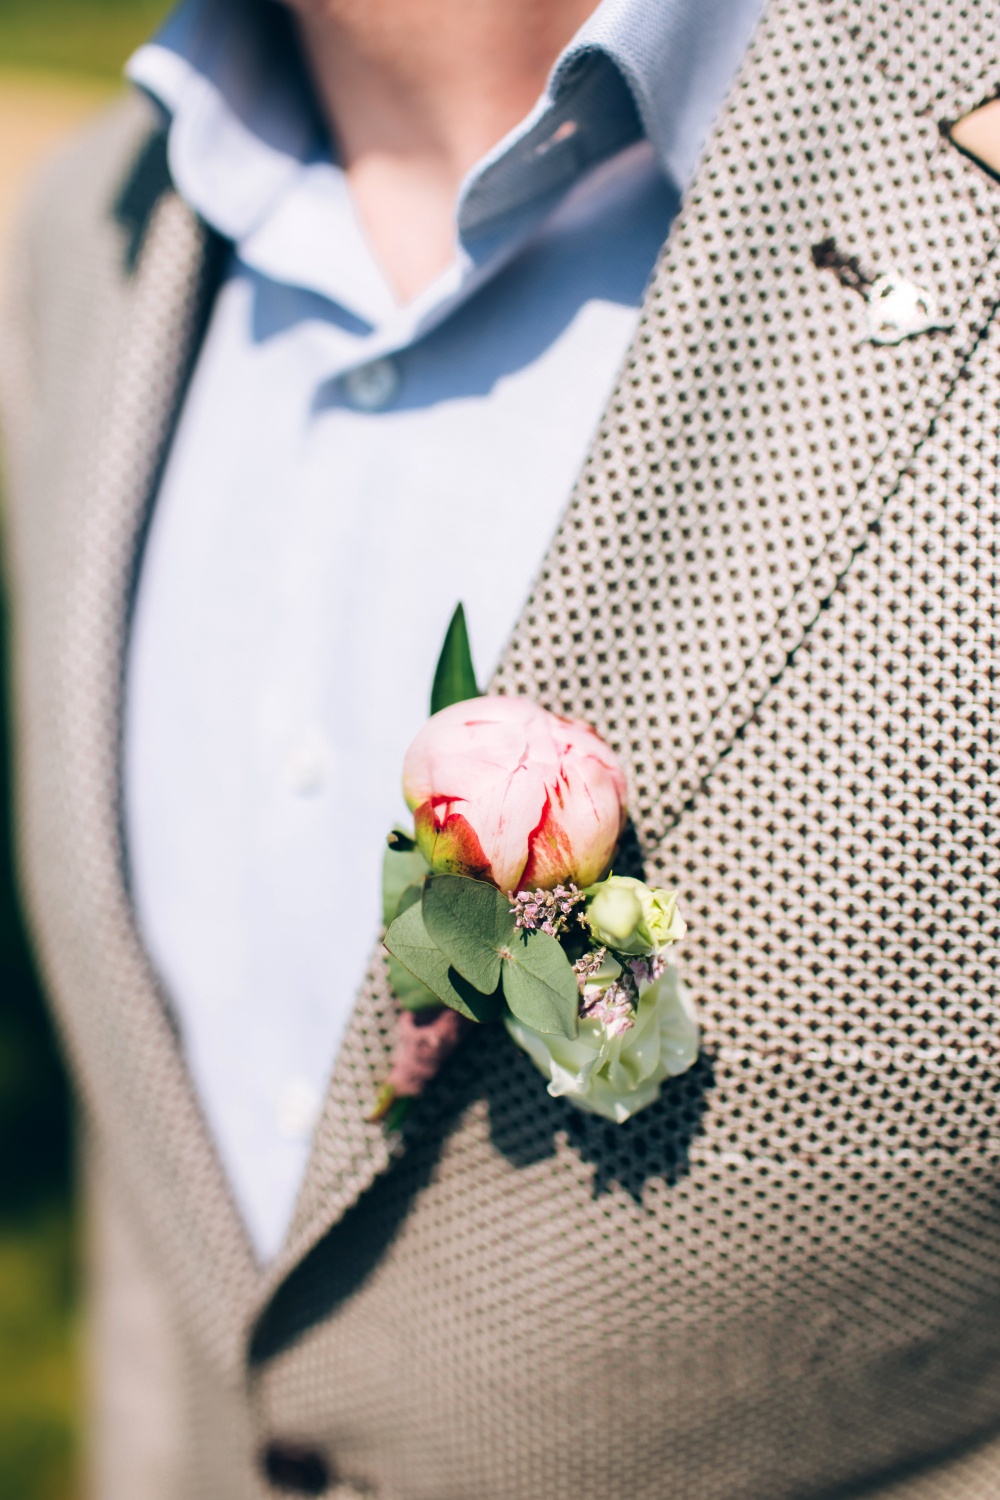 boutonniere on the lapel of his jacket